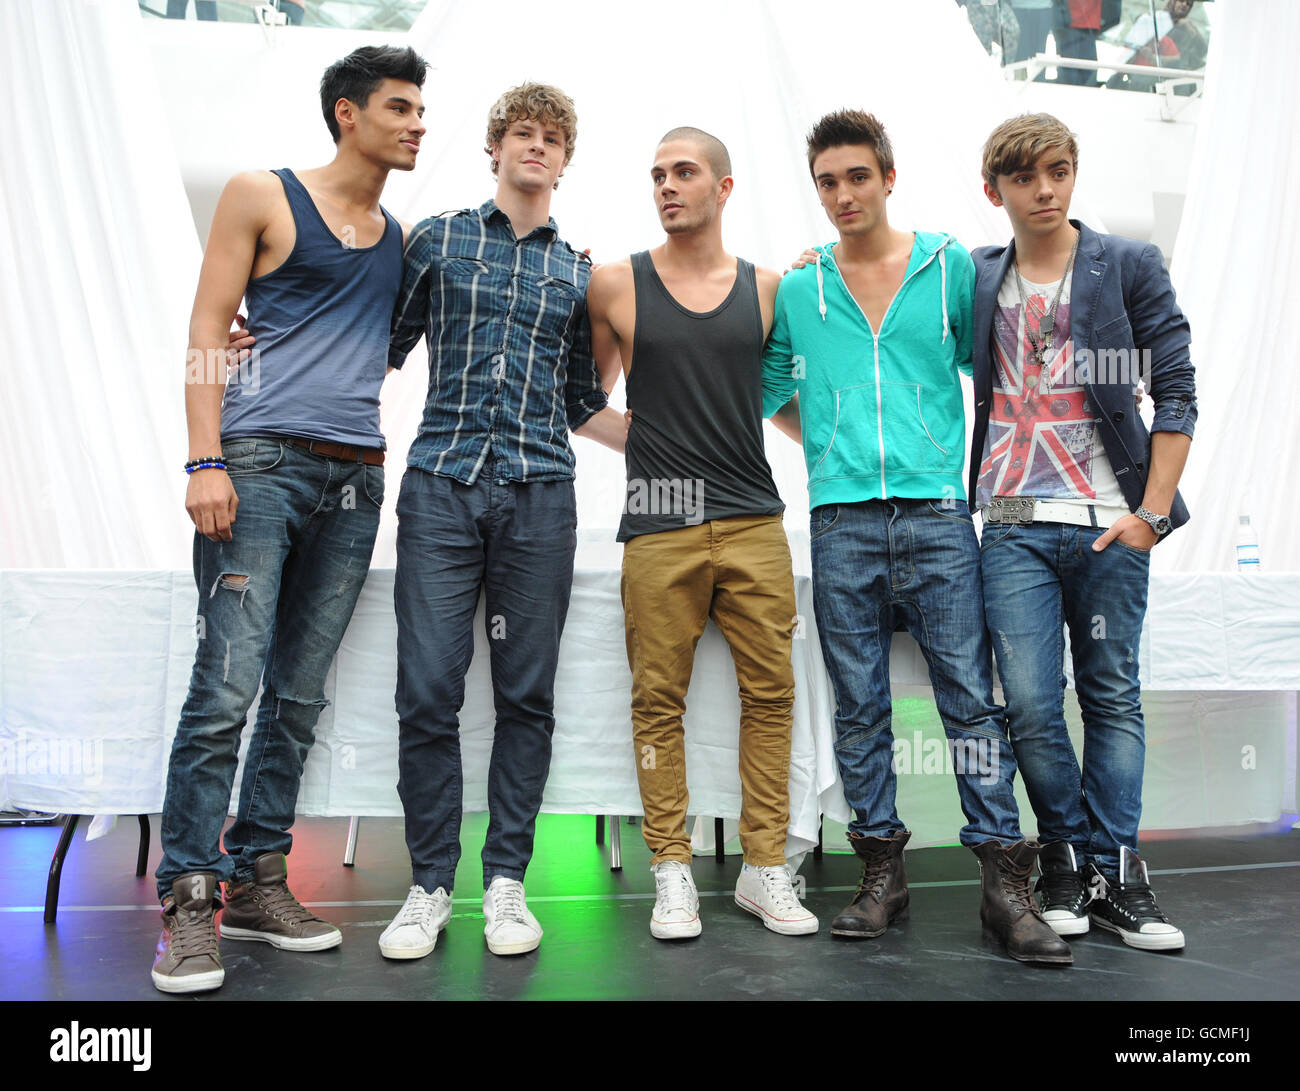 Members of The Wanted (from the left) Siva, Jay, Max, Tom and Nathan after performing at Westfield shopping centre, London. Stock Photo